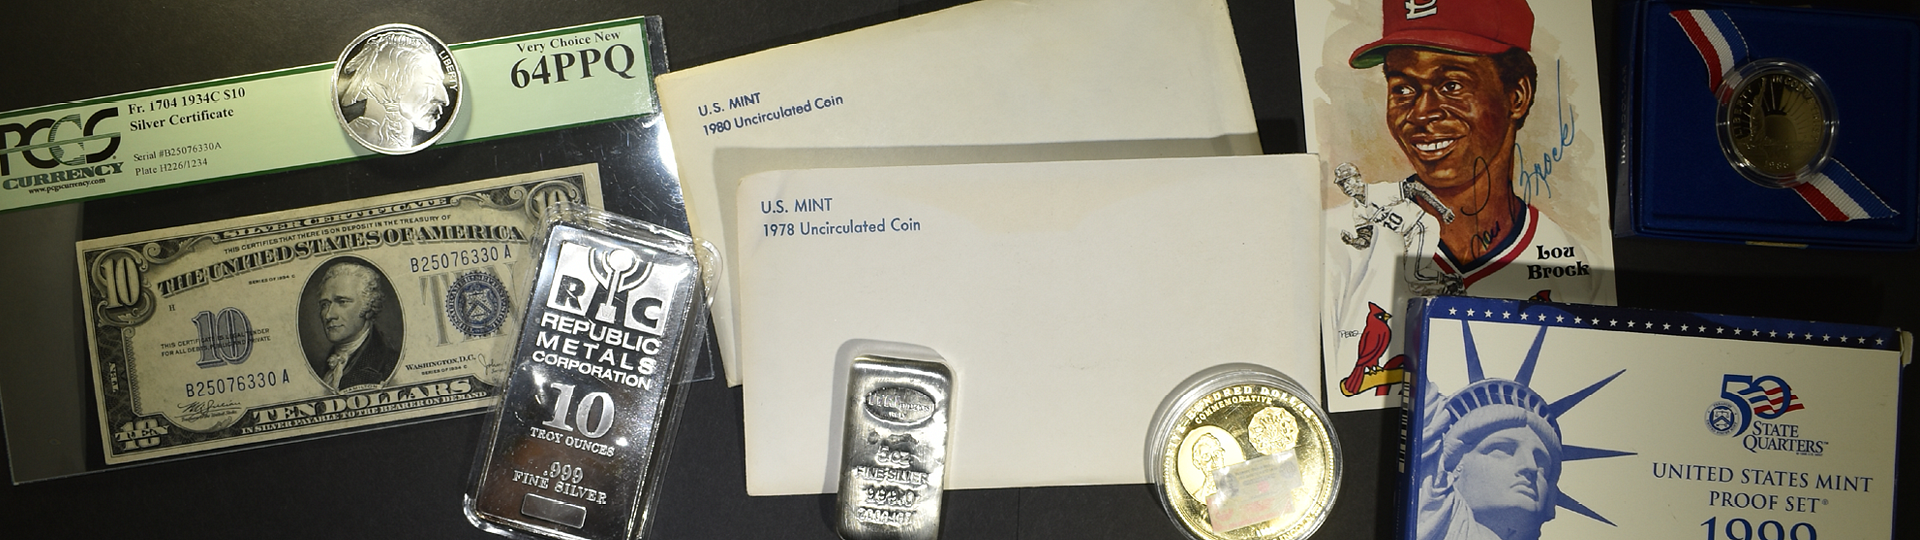 January 18th Silver City Rare Coins & Sports by Silver City Auctions